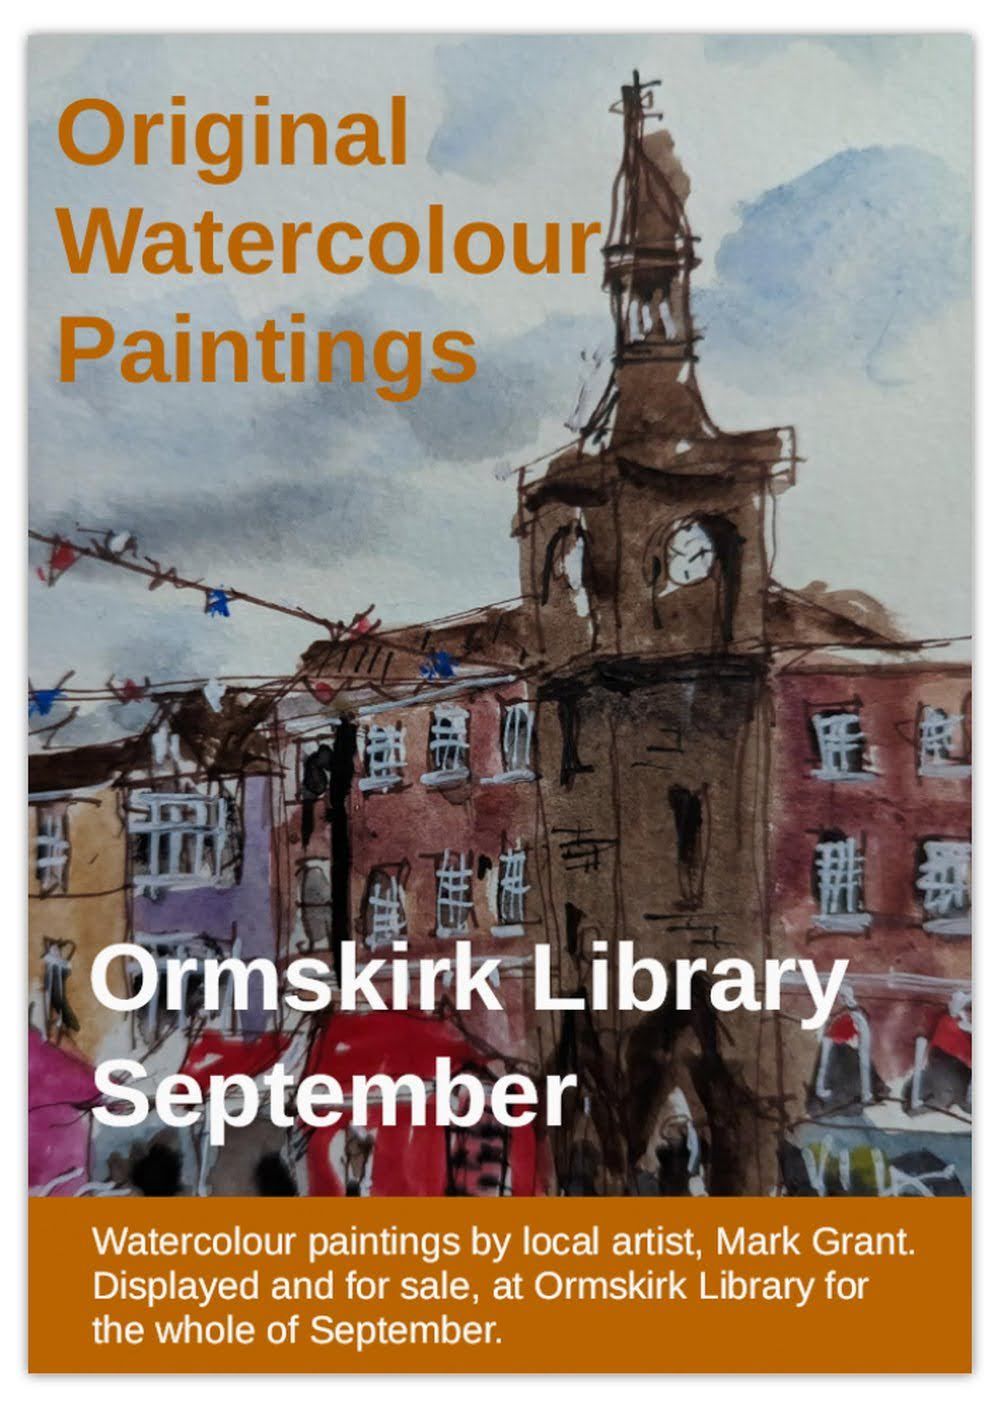 Watercolour art in Ormskirk Library by Artist Mark Grant including urban sketch artwork